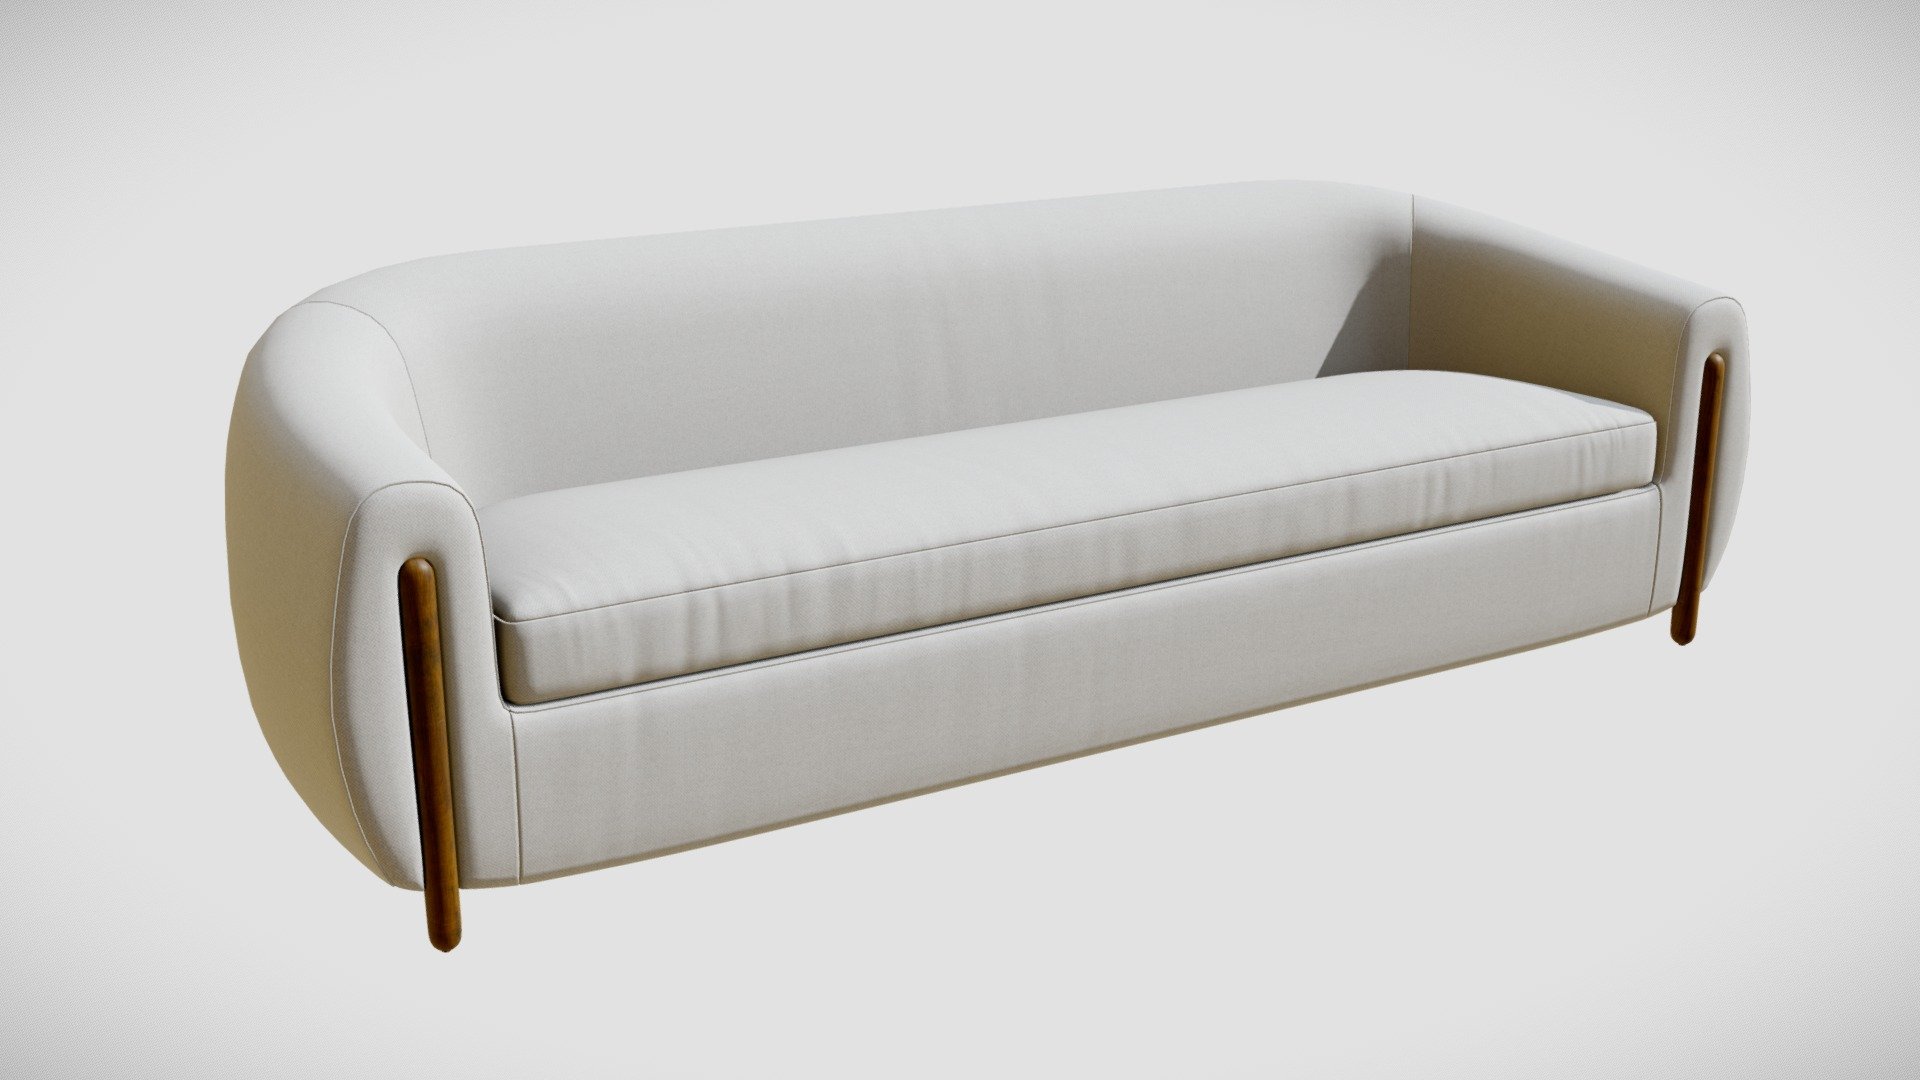 High-quality 3d model of a Crete and Barrel Nora Warm Ivory Tub Sofa.

Original: https://www.crateandbarrel.com/nora-warm-ivory-tub-sofa/s419972

7512 polygons
7927 vertices - Crate&Barrel Nora Sofa - Buy Royalty Free 3D model by 3detto 3d model